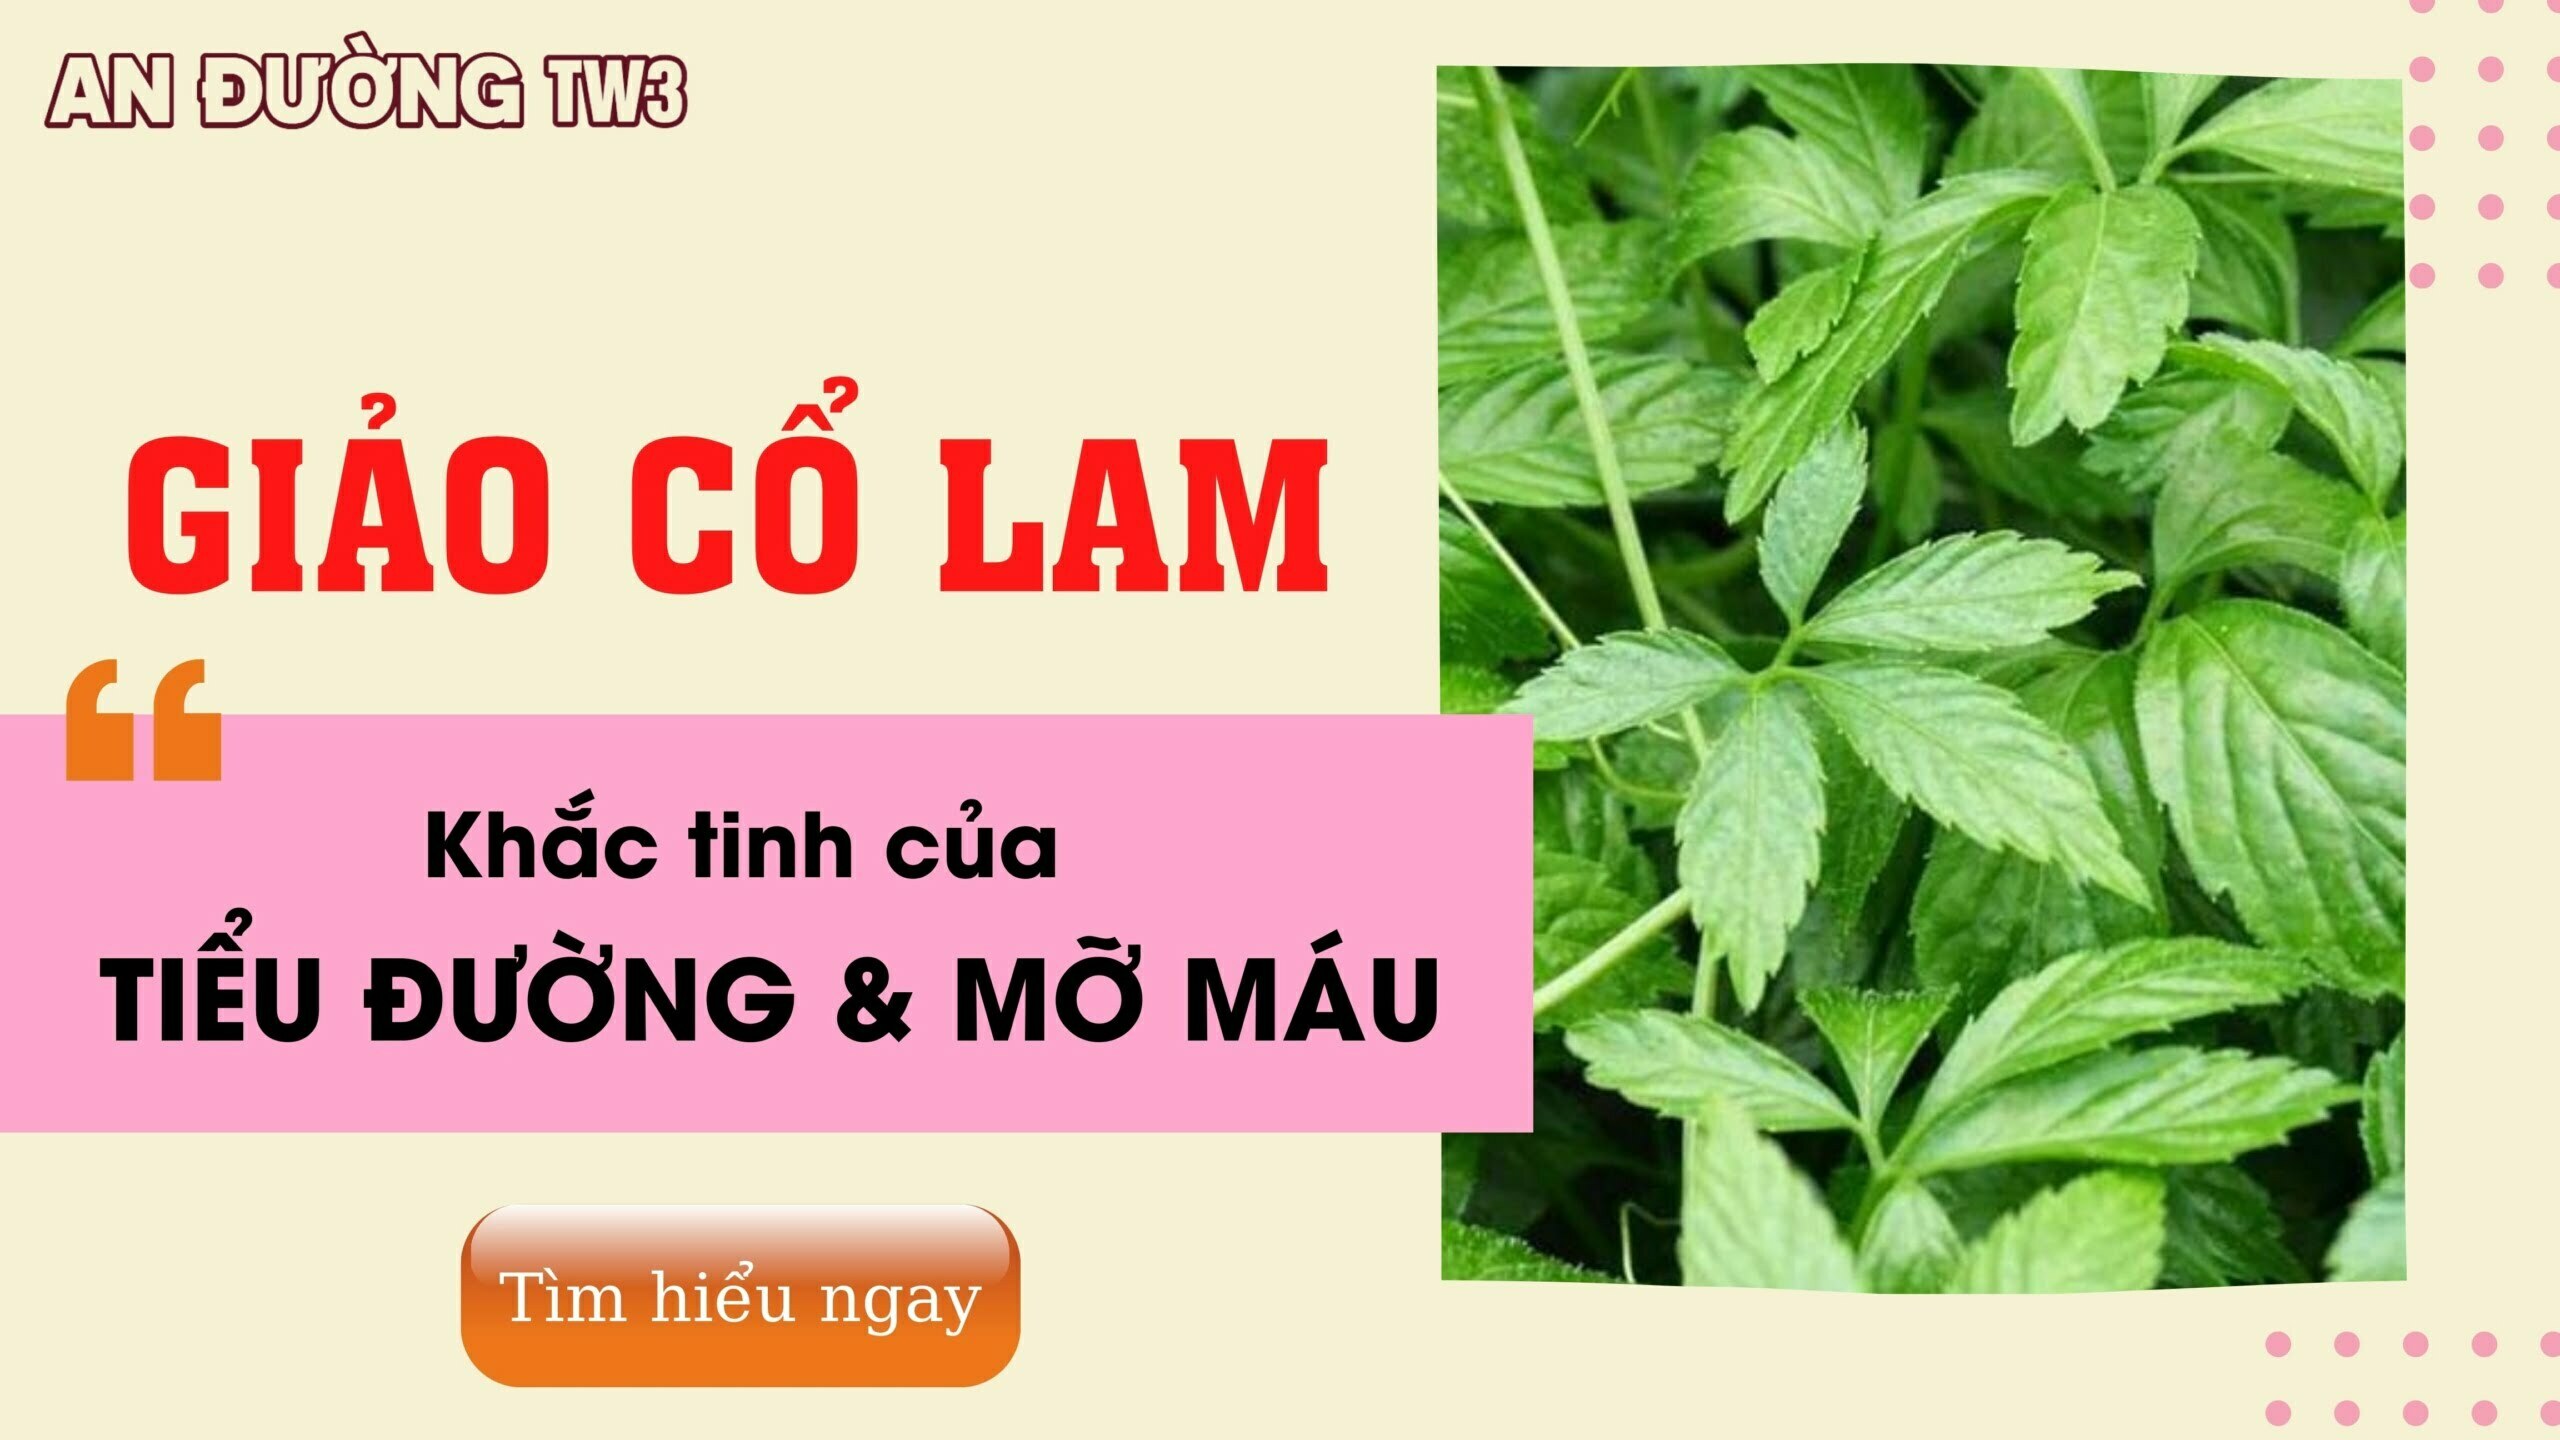 DL giảo cổ lam